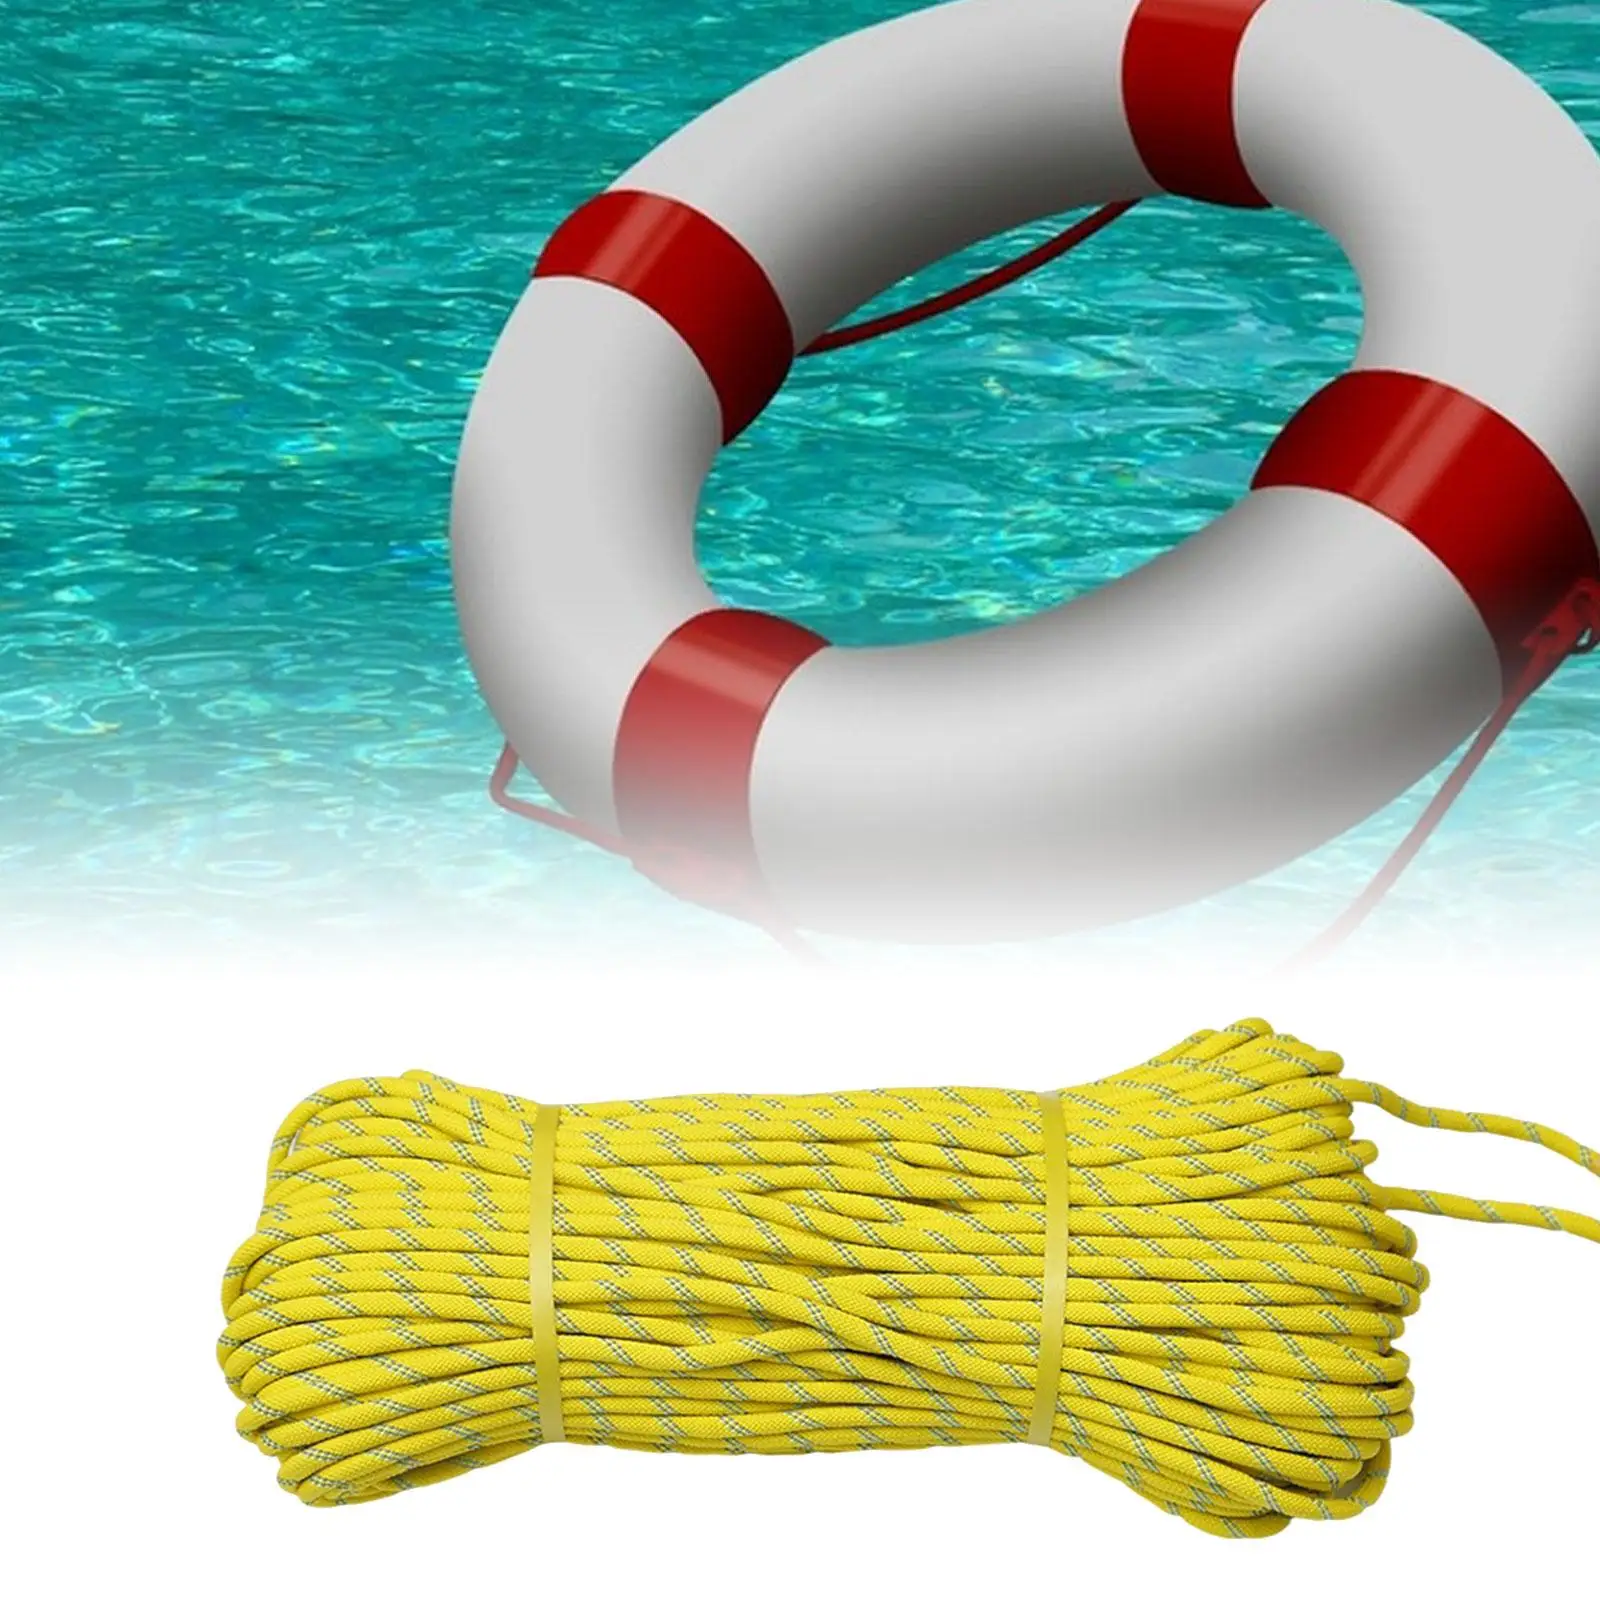 30M Throw Rope Accessories Flotation Device High Visibility Water Floating Rope for Outdoor Swimming Fishing Rafting Kayaking